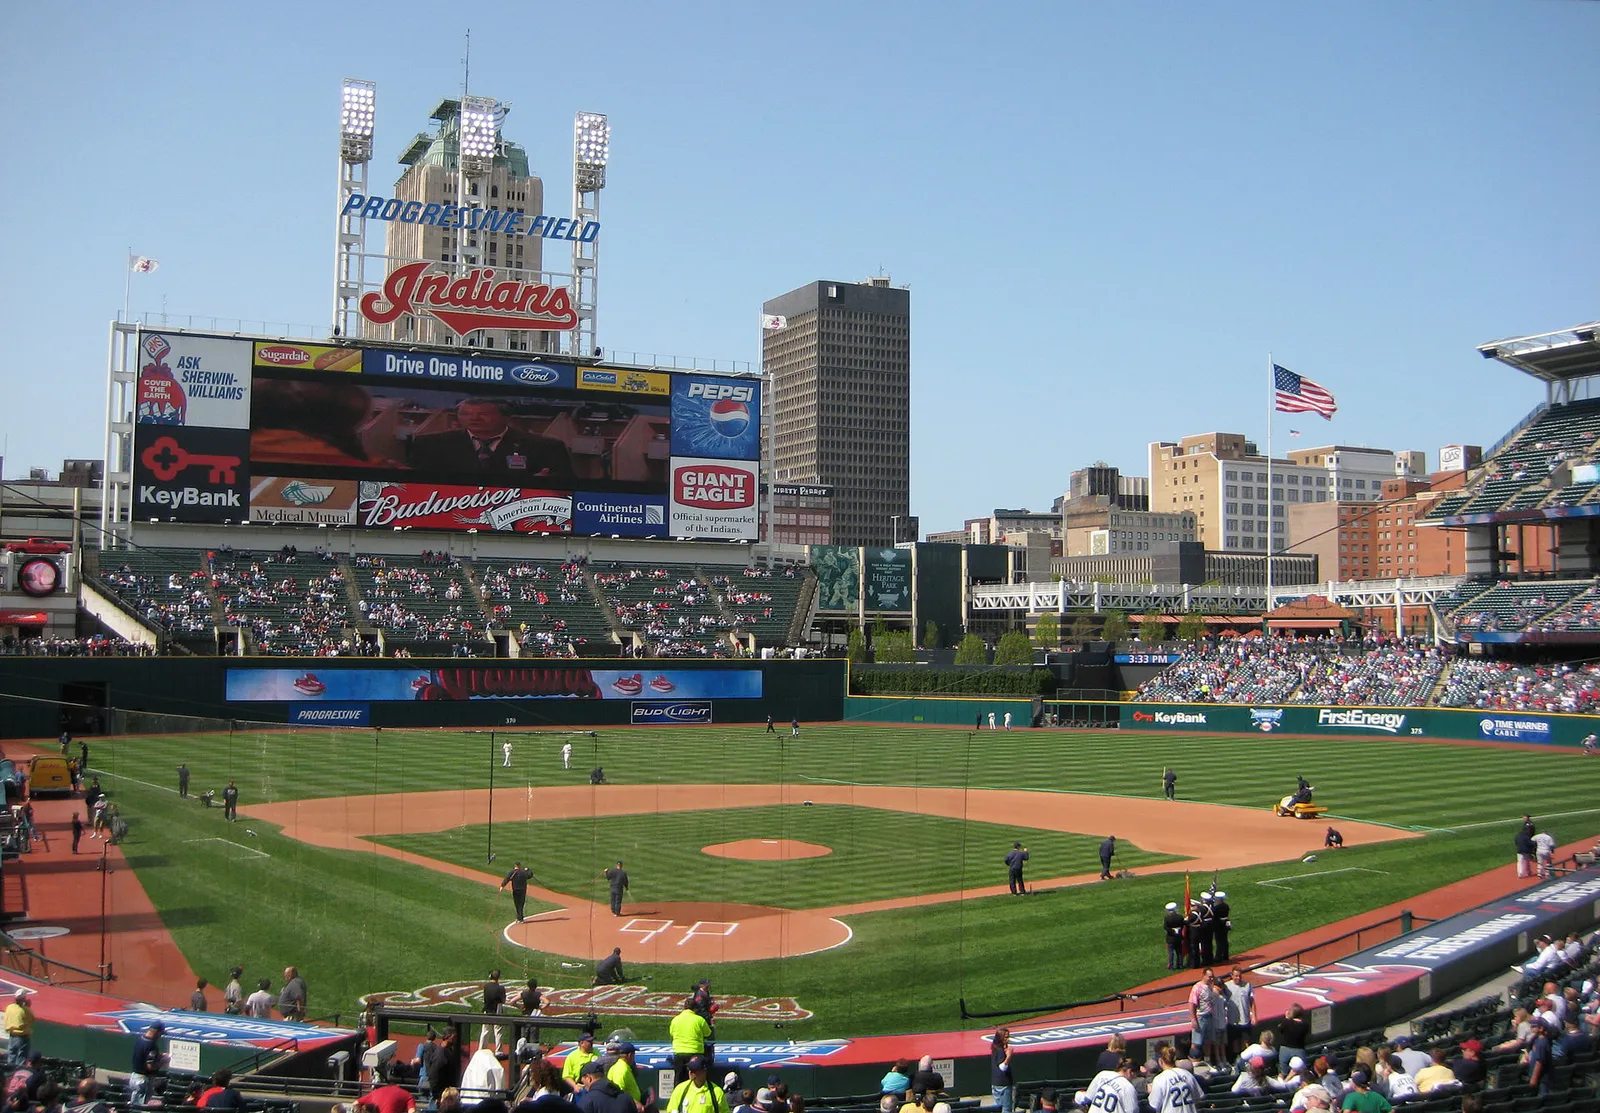 Cleveland's Baseball Team Will Drop Its Indians Team Name - The